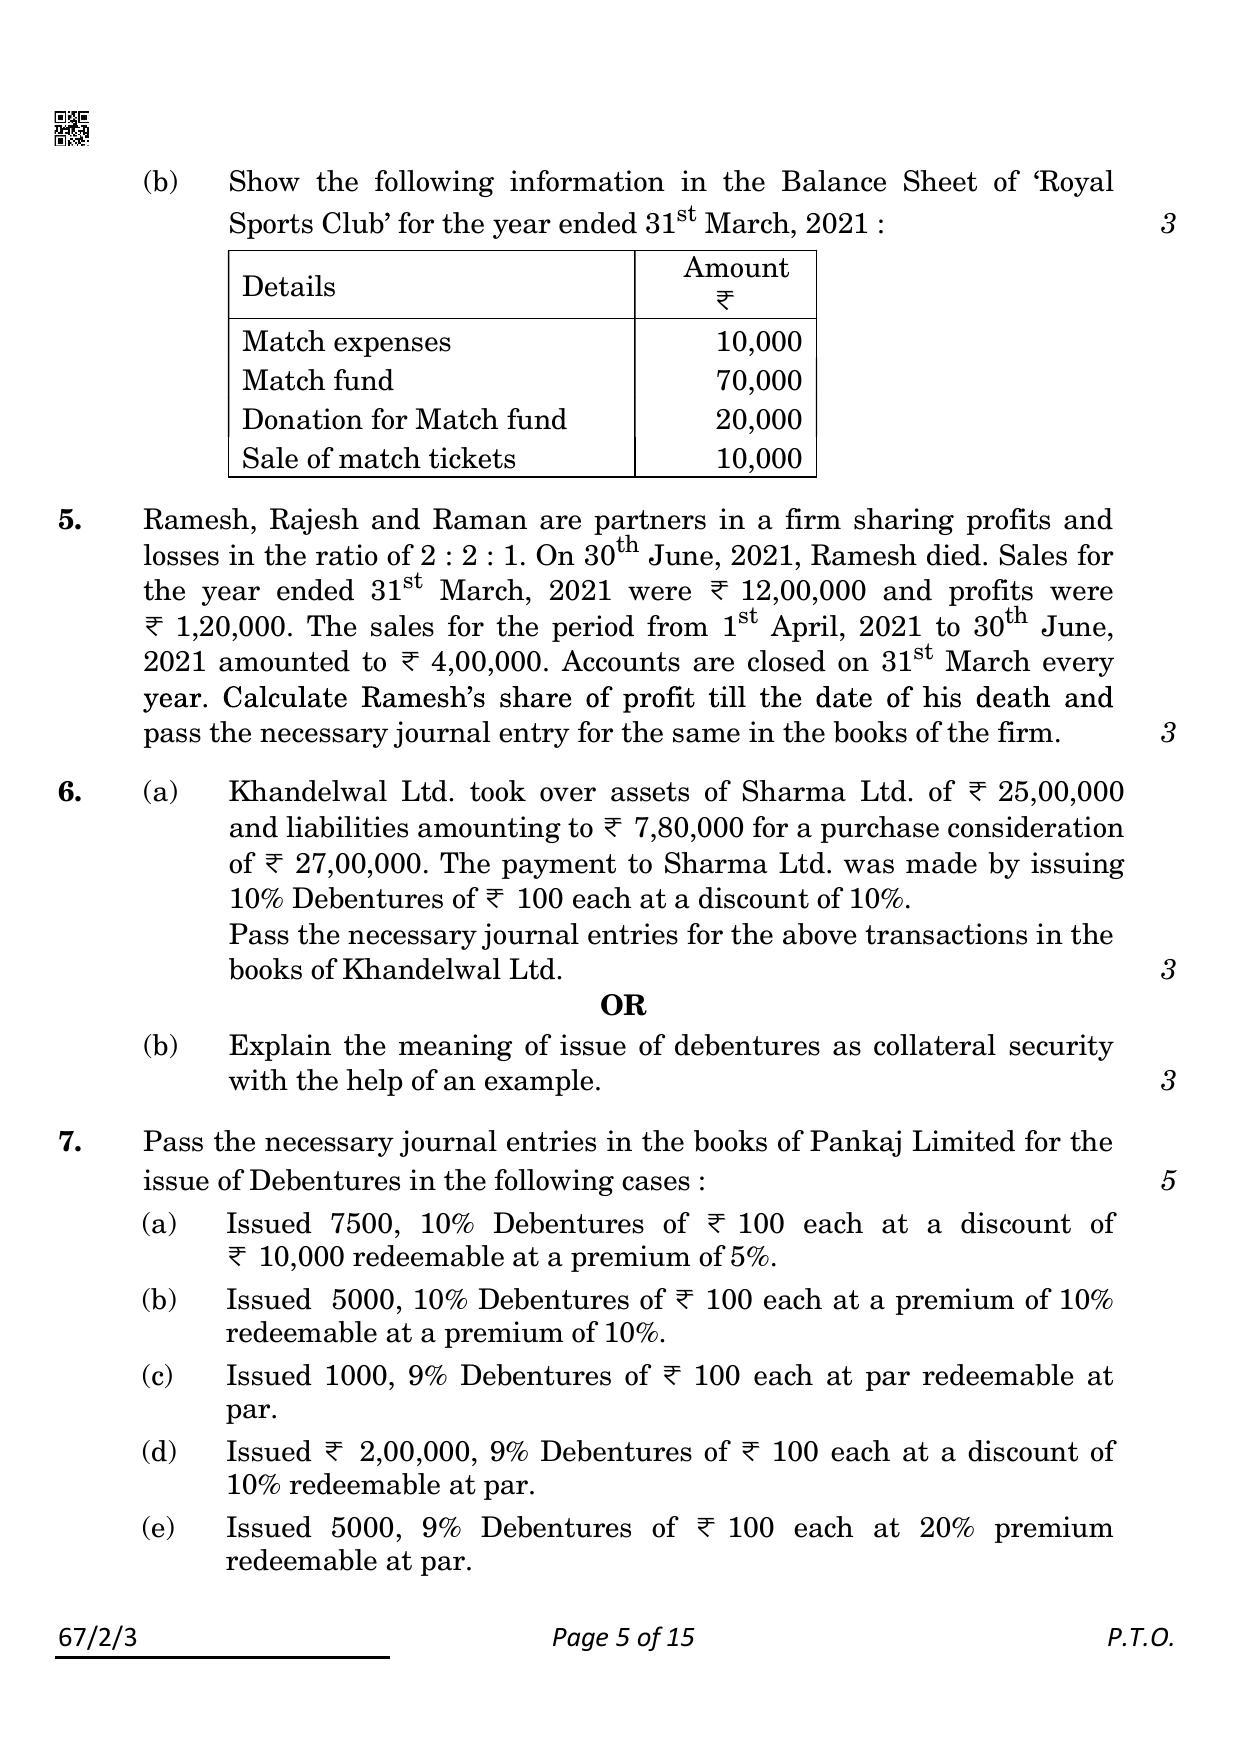 CBSE Class 12 67-2-3 Accountancy 2022 Question Paper - Page 5